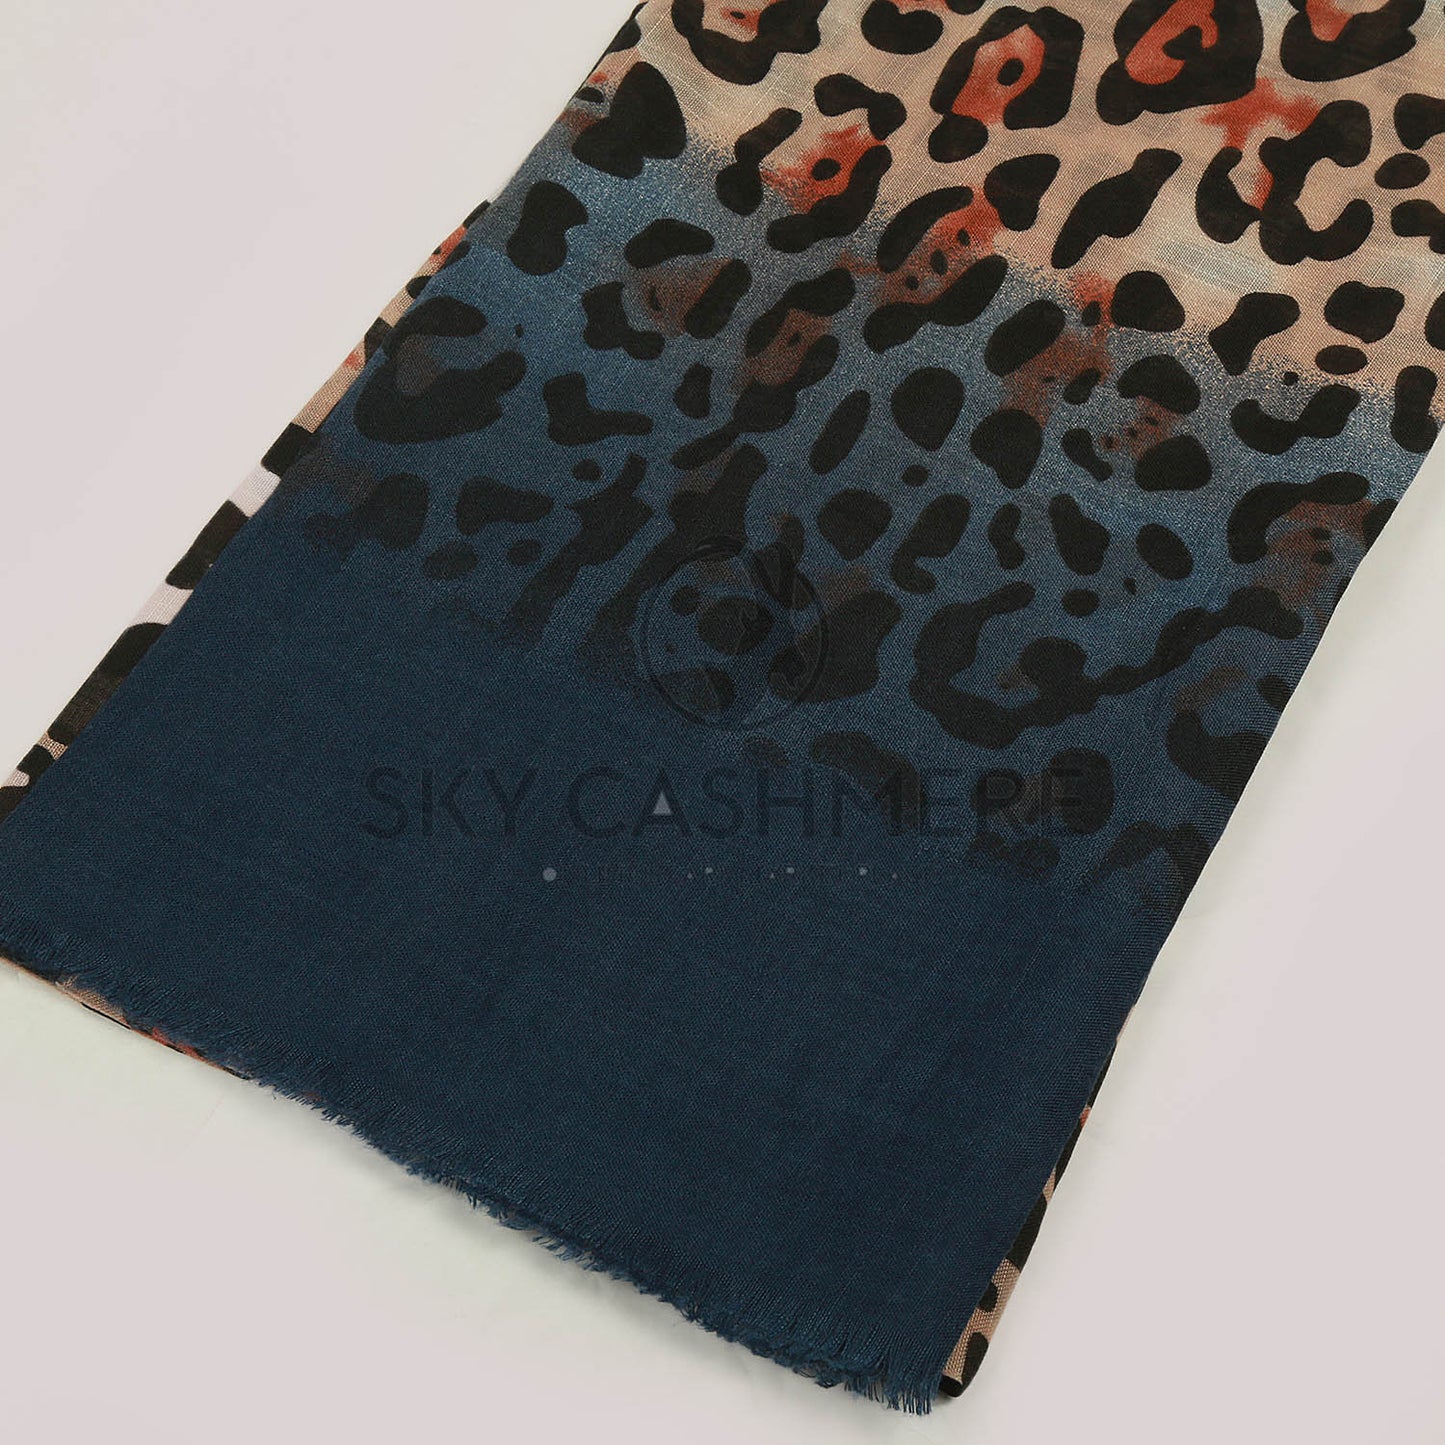 Turkish Lawn Self Texture with Tiger Print Soft & smooth Fabric - Charcoal